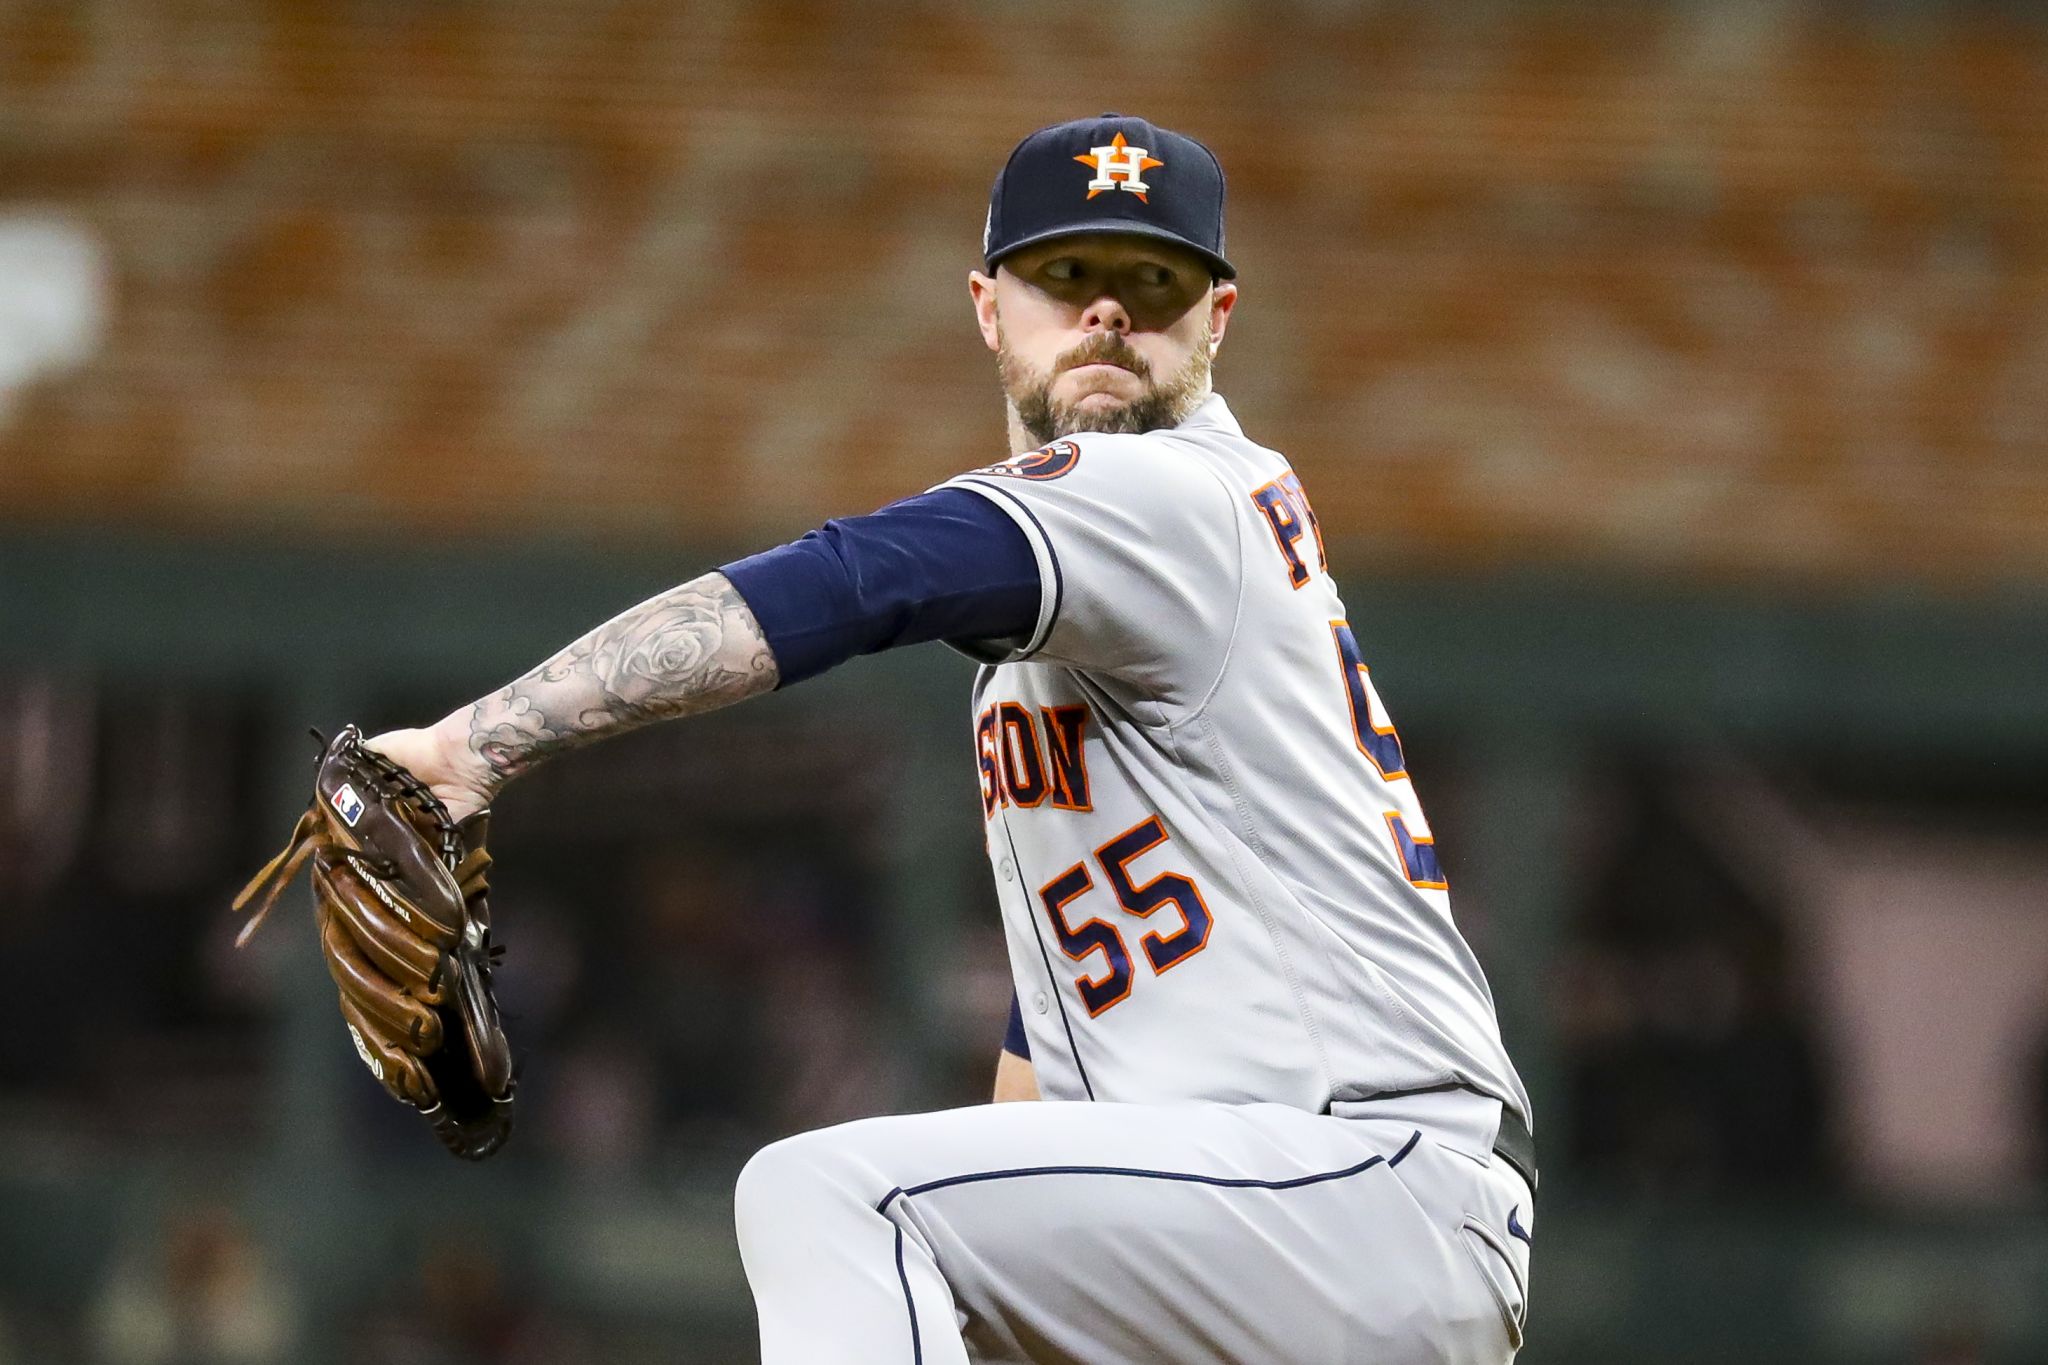 Ryan Pressly Strikeout, Pressly shut 'em down to secure the series win., By Houston Astros